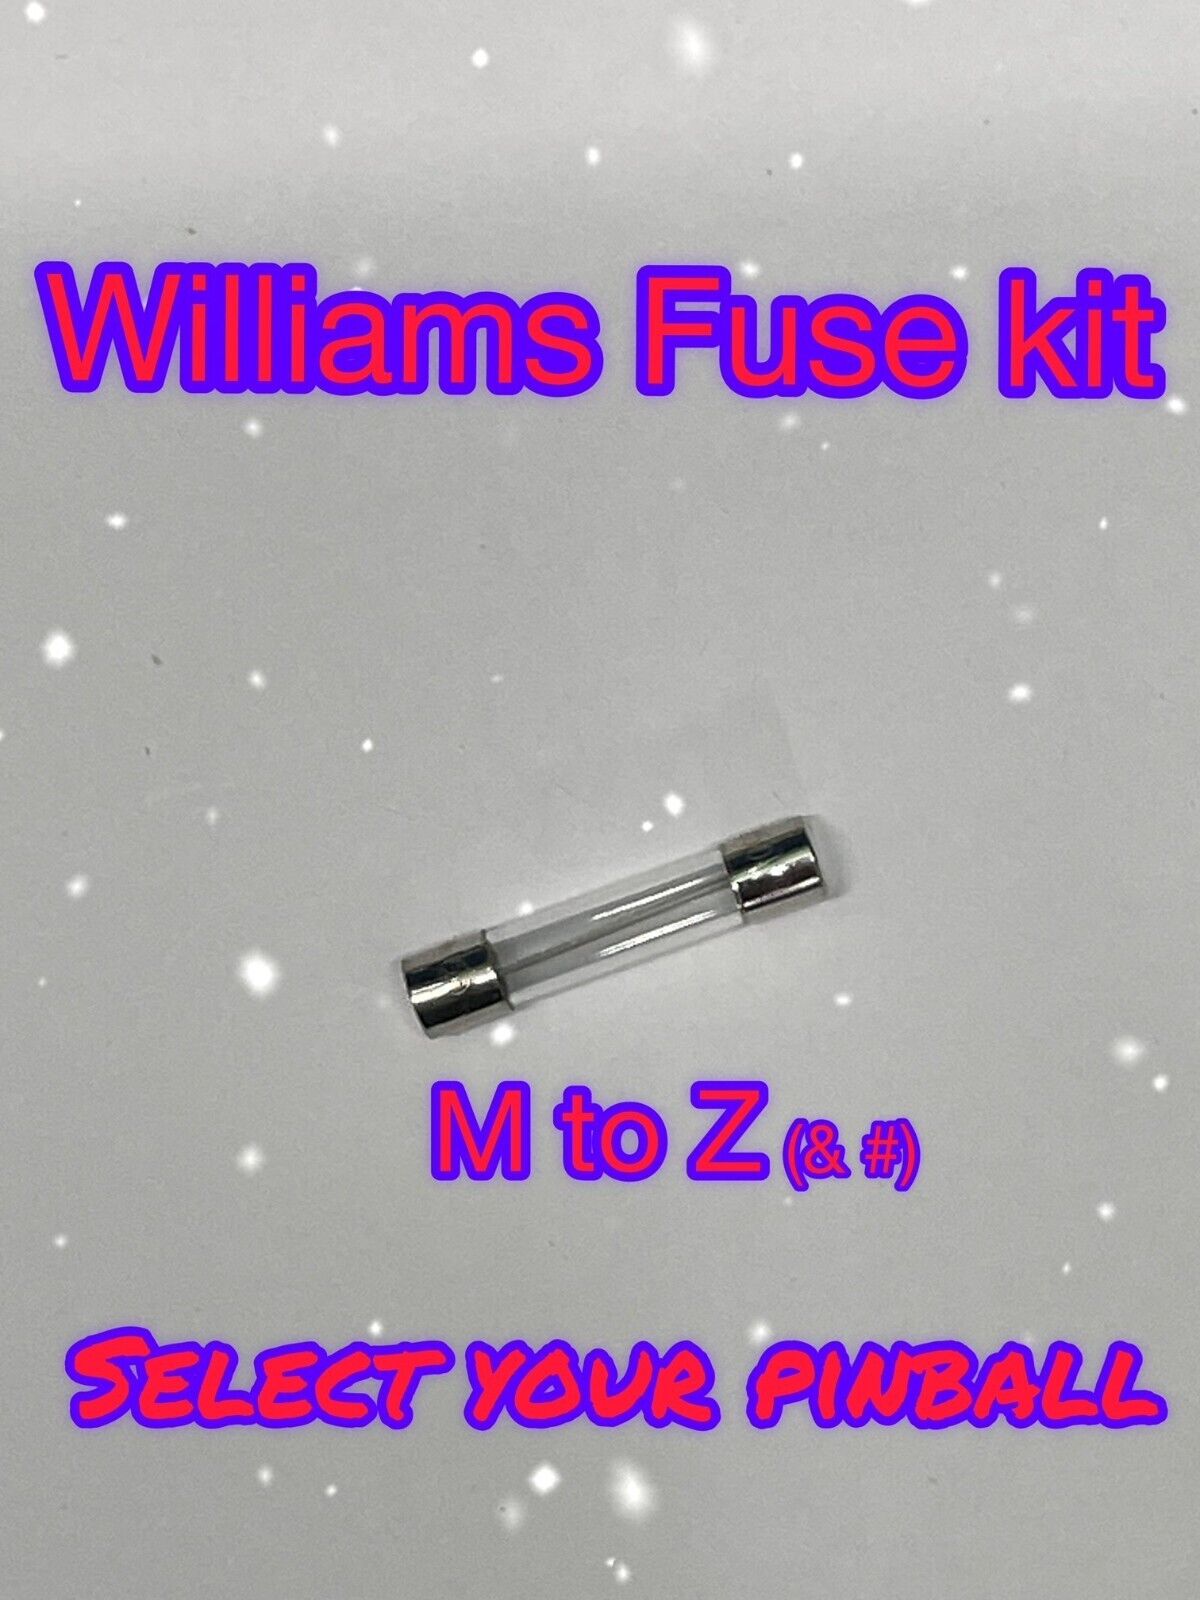 Williams Pinball Machine Fuse Kit **Select Your Pinball (M to Z and #)**